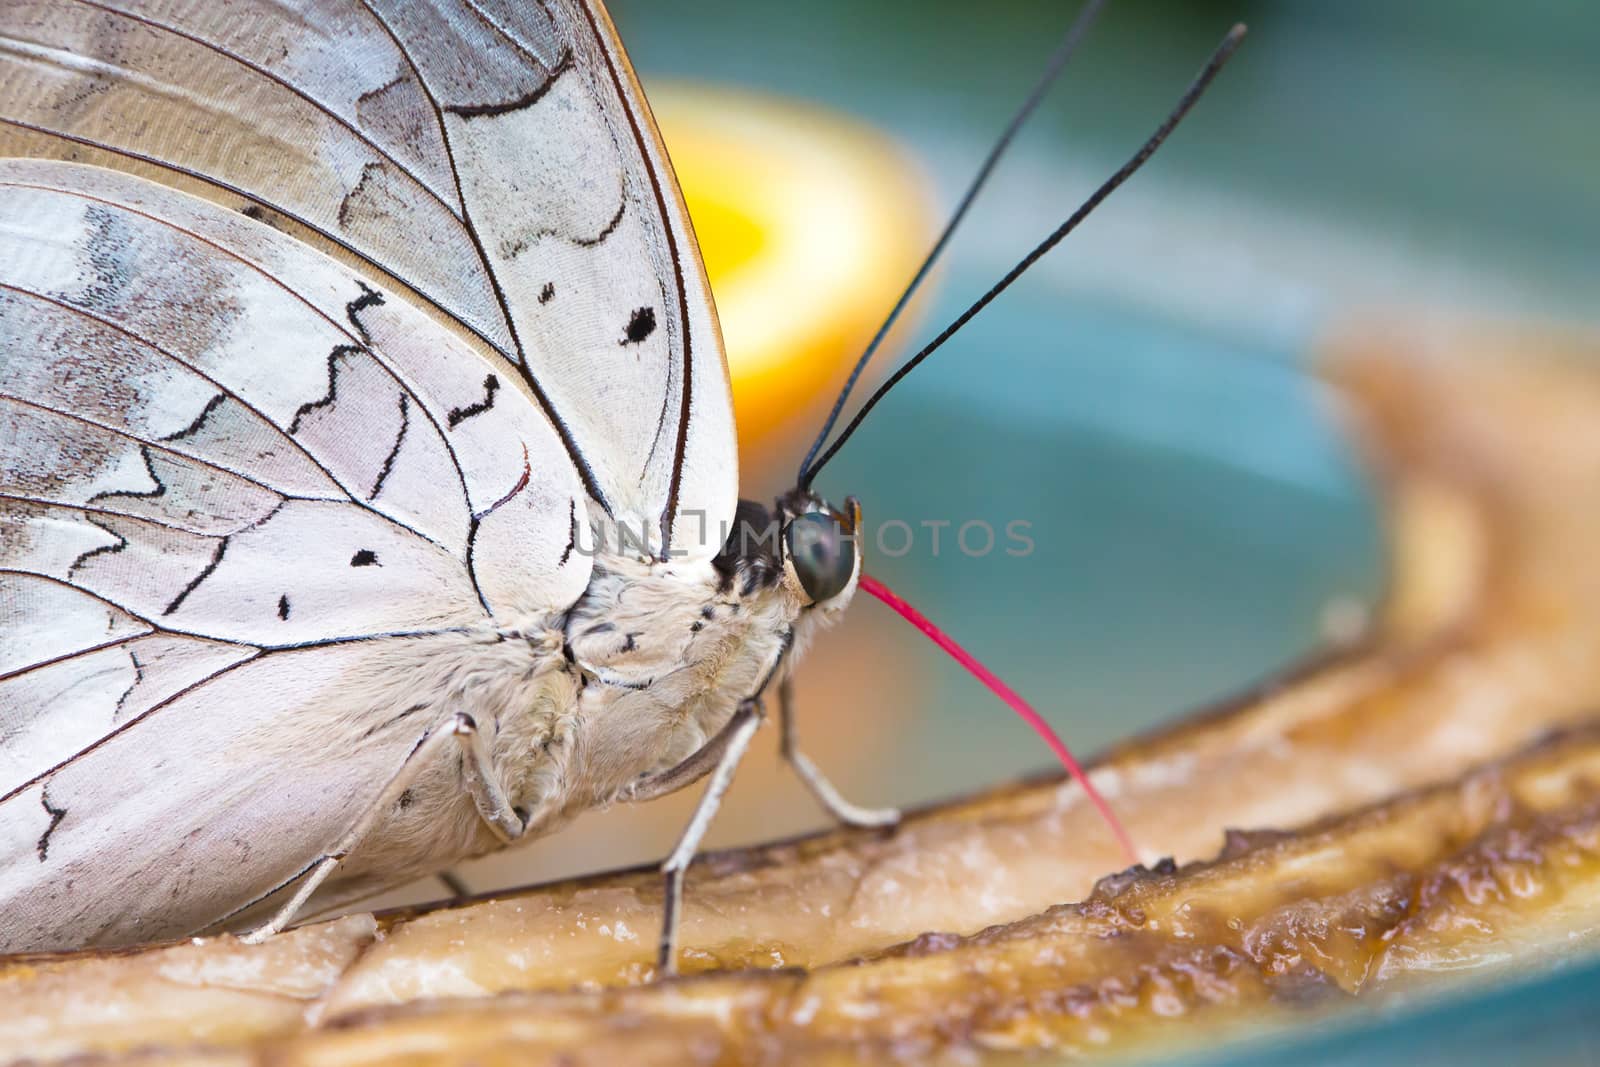 Colorful Butterfly closeup sitting and eating banana